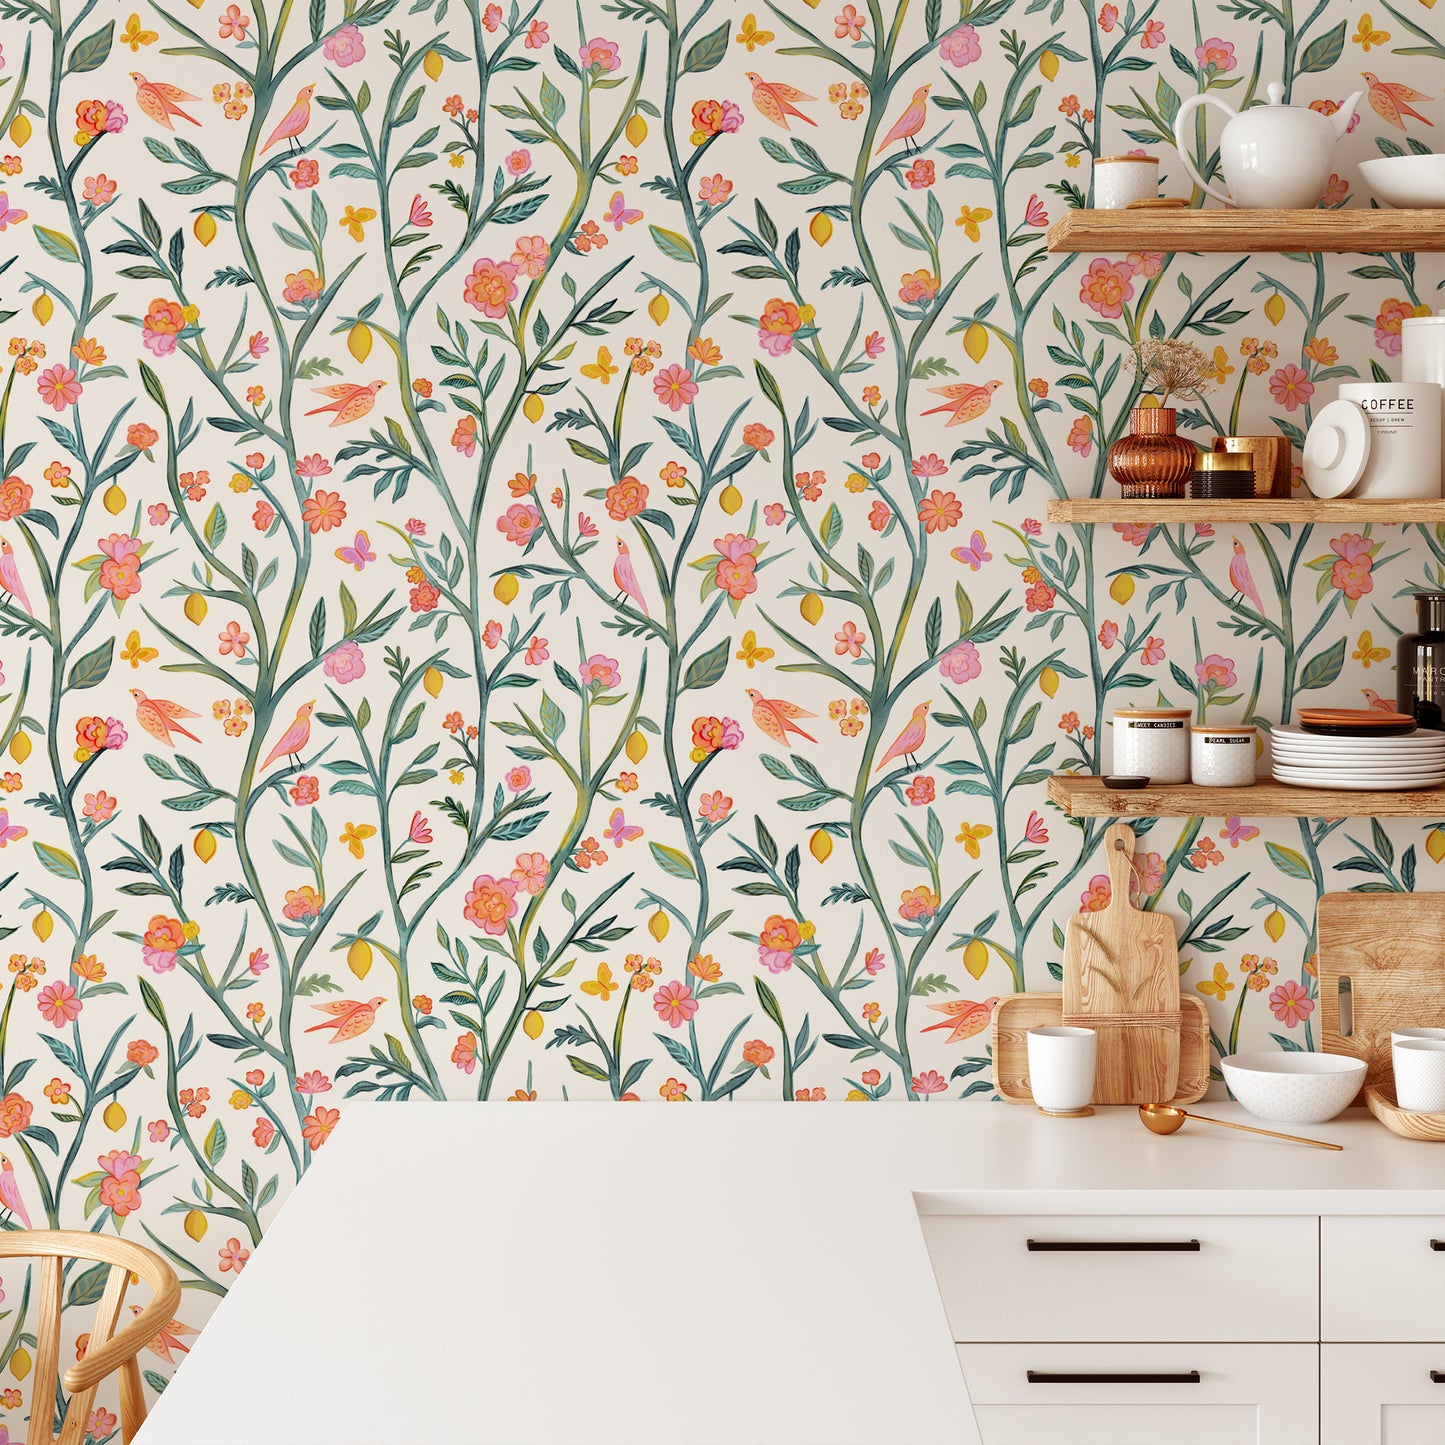 Bedroom featuring Iris + Sea Garden Vines- Multi Peel and Stick Wallpaper - a floral pattern